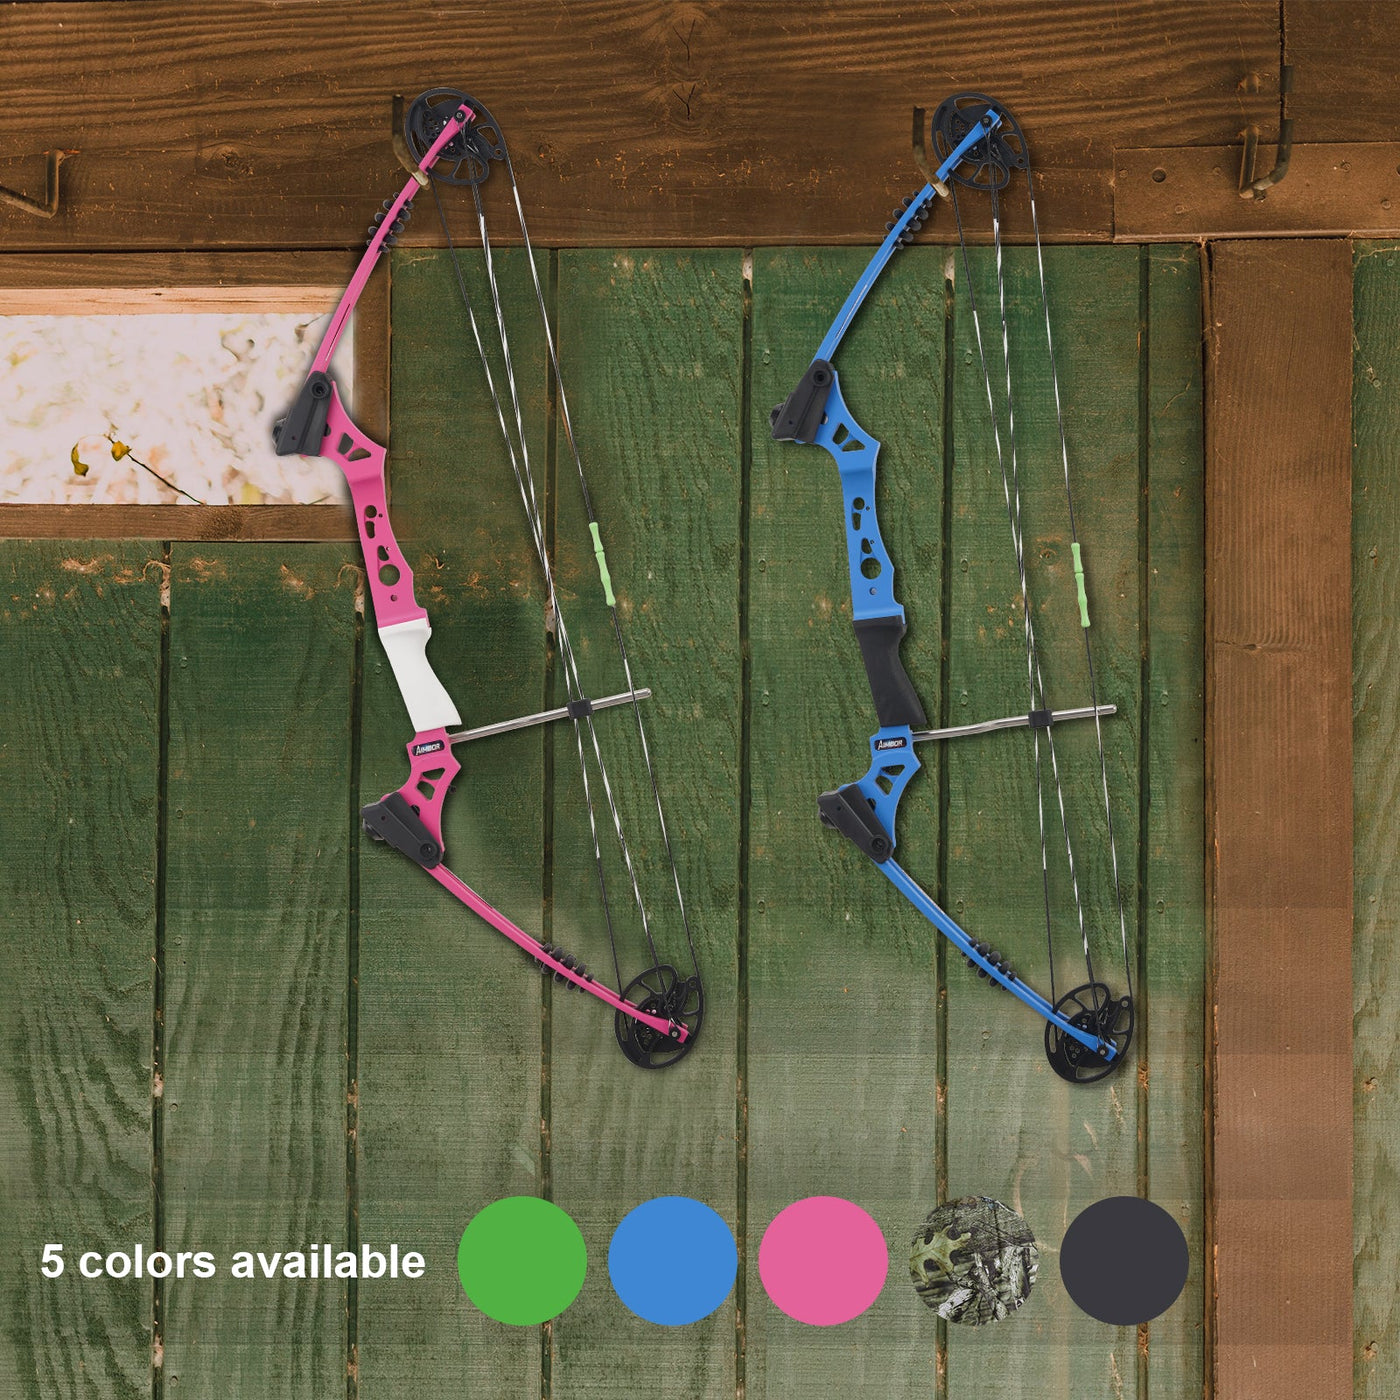 M009 Blue Archery Compound Bow&Arrow Set, For Youth&Adults, Ages 16+